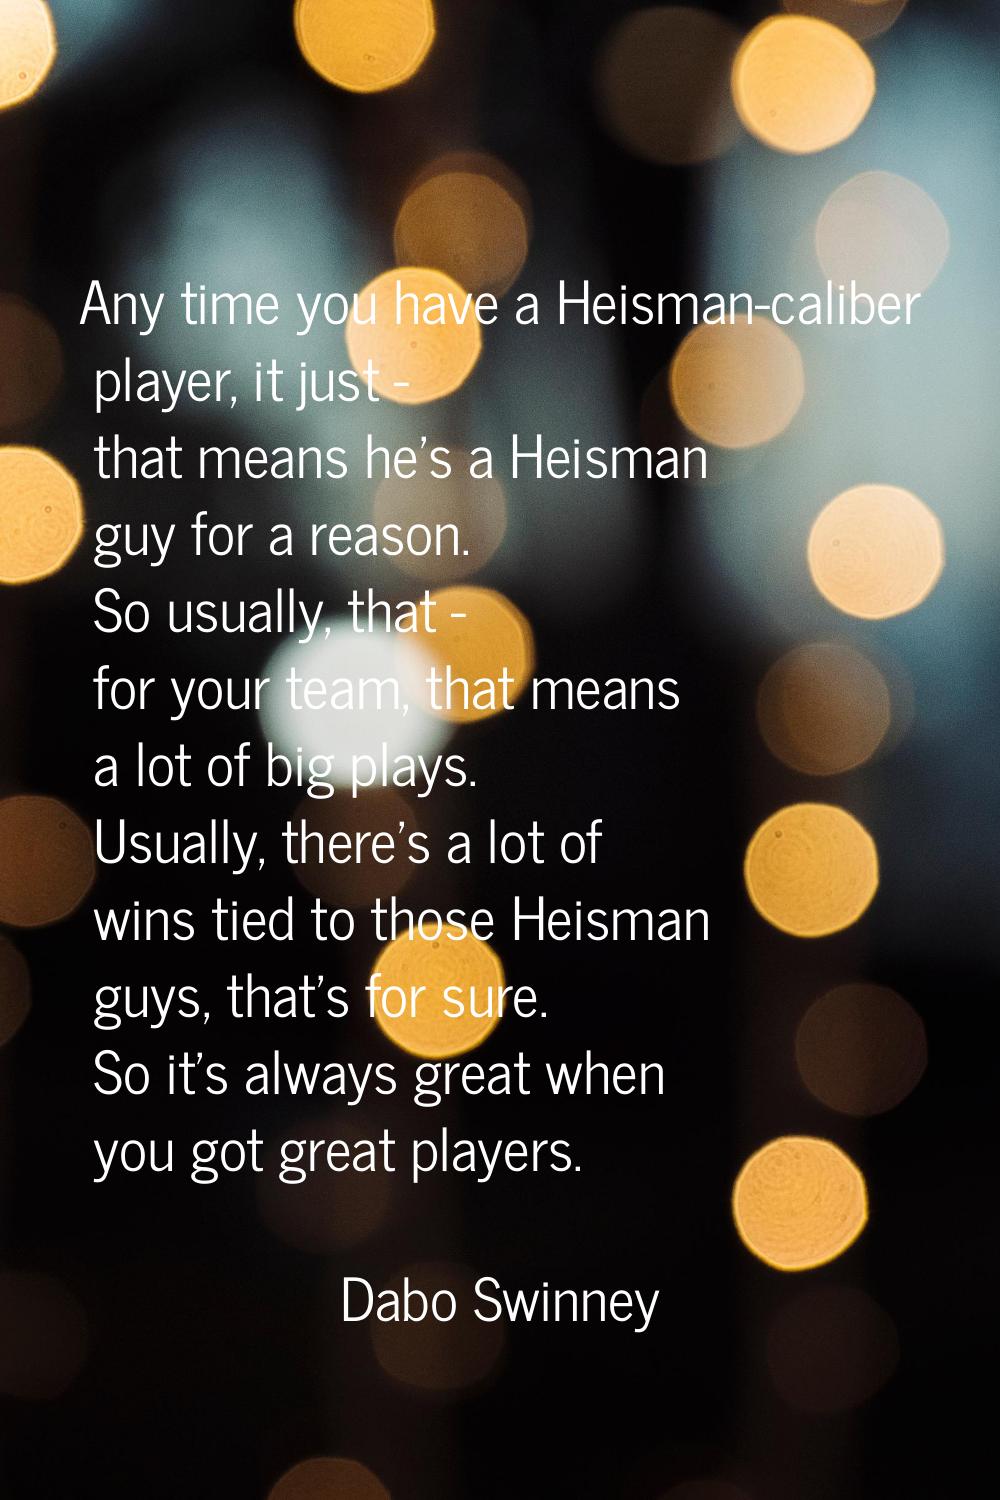 Any time you have a Heisman-caliber player, it just - that means he's a Heisman guy for a reason. S